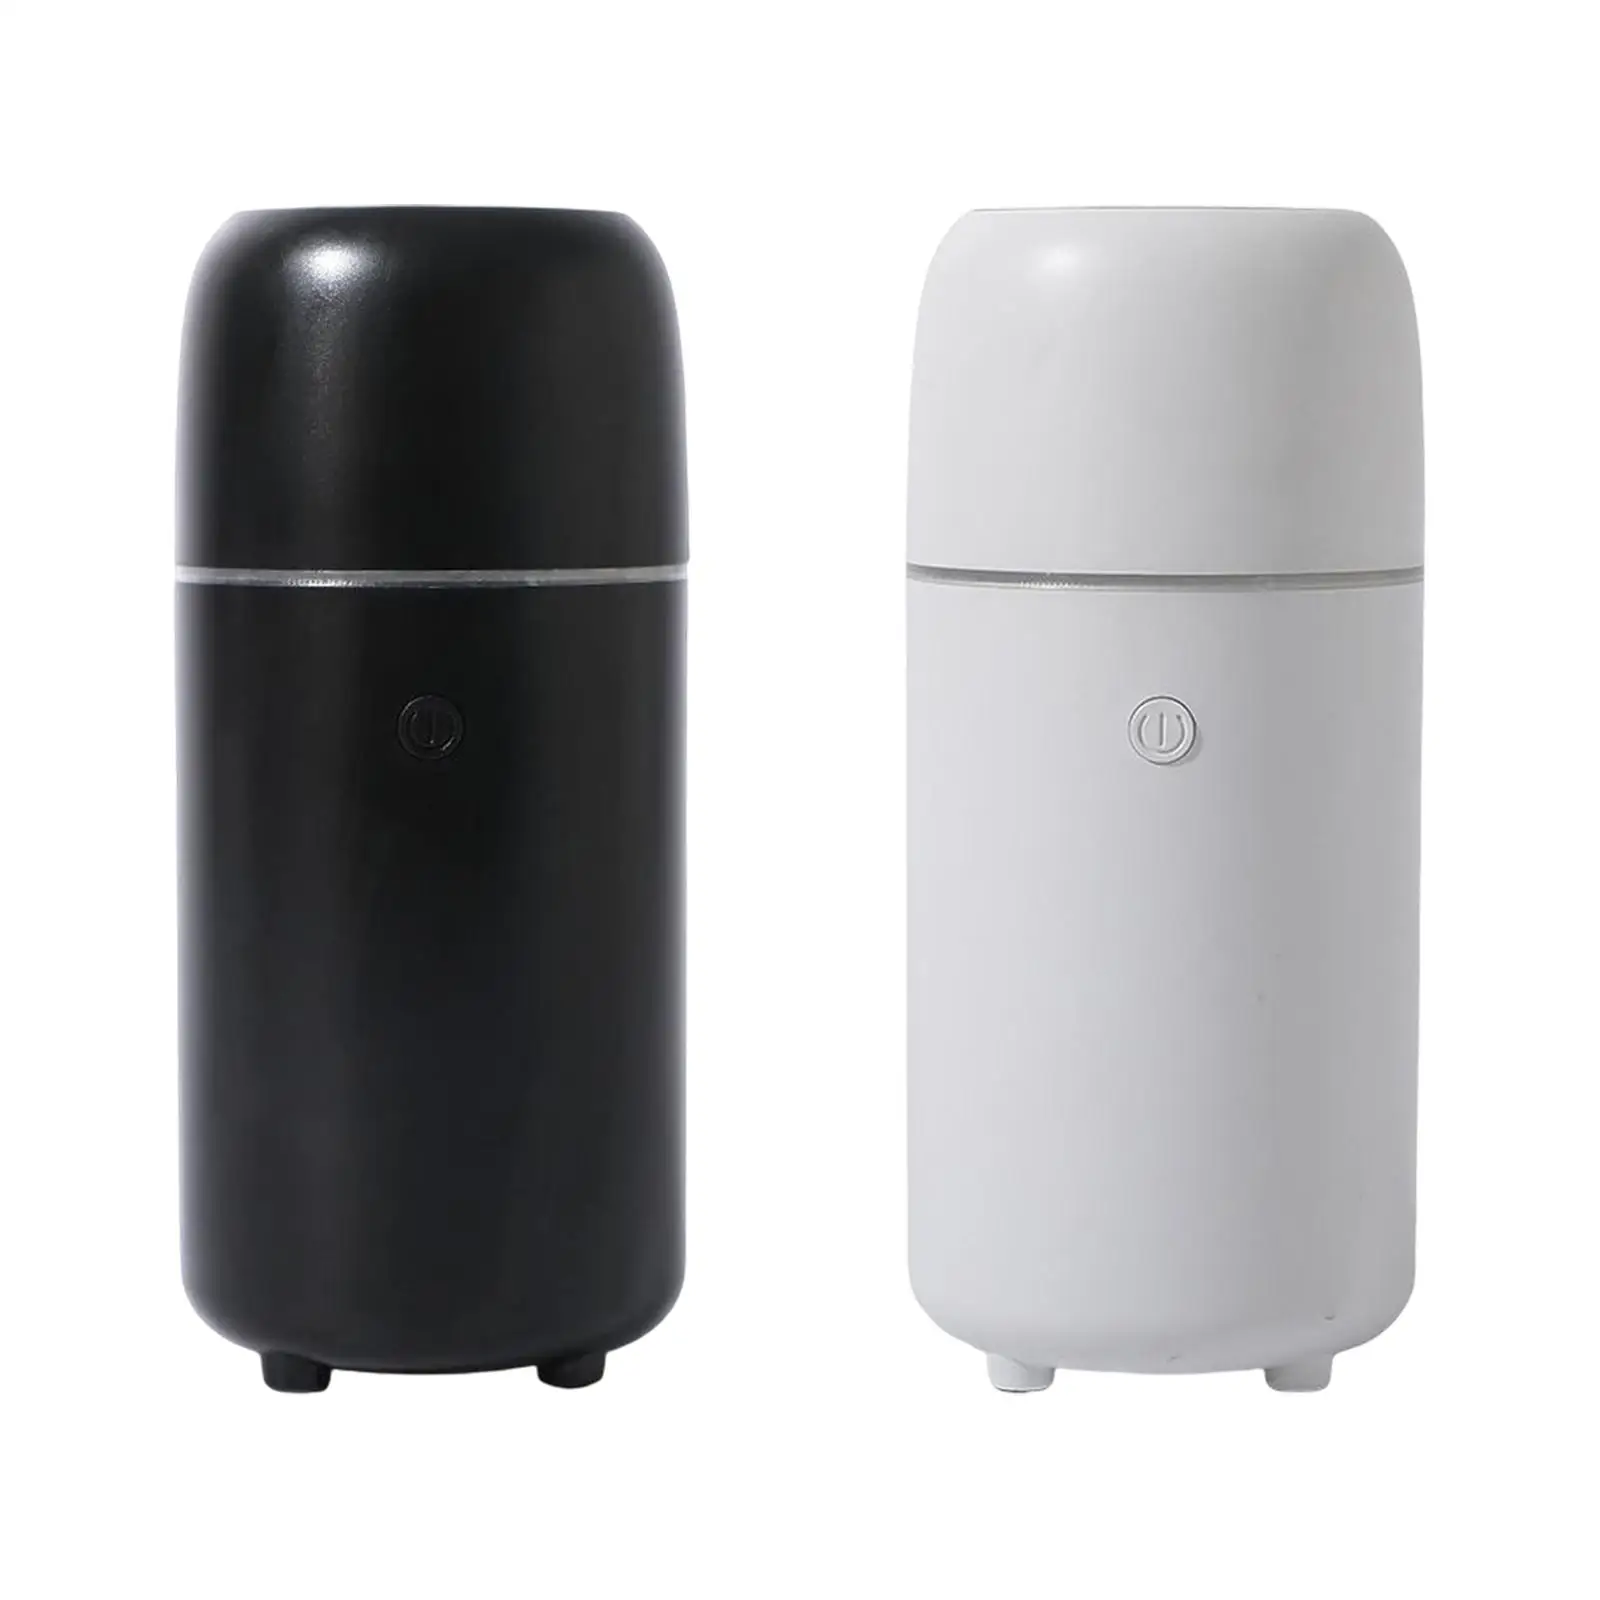 Desktop Humidifier Auto Shut Off Personal Humidifier for Office Bedside Home